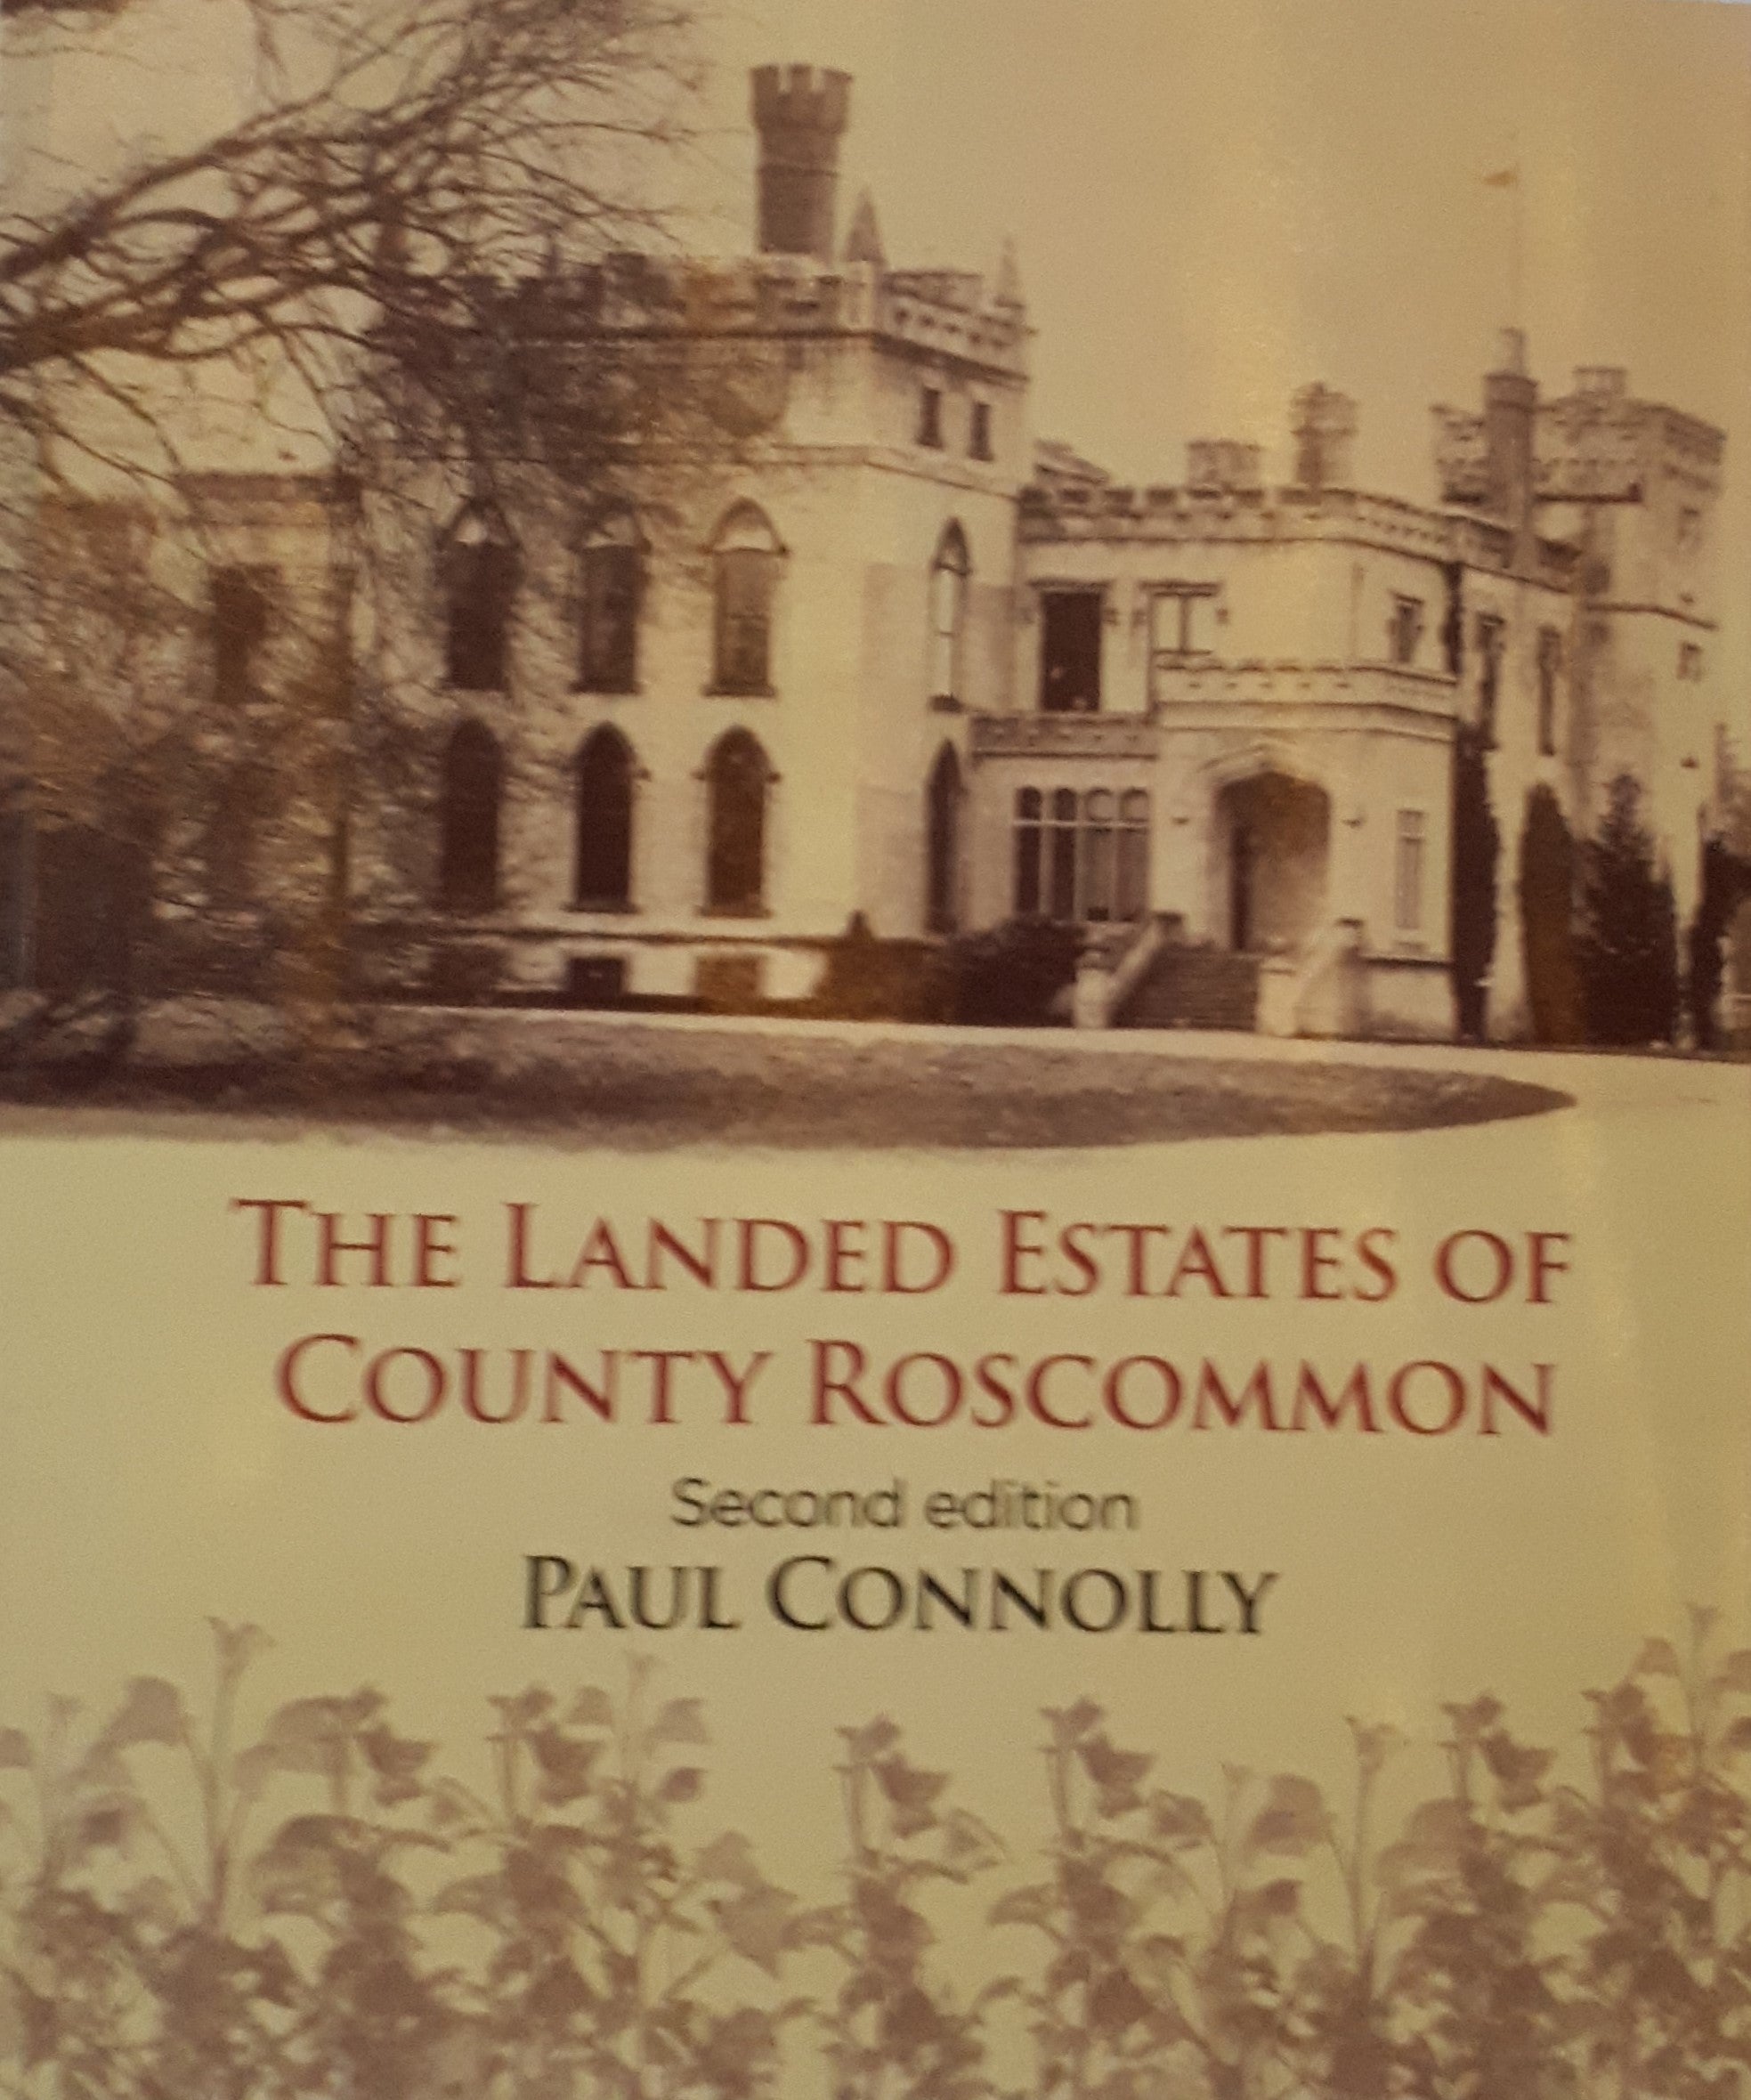 Landed Estates of County Roscommon - Second Edition